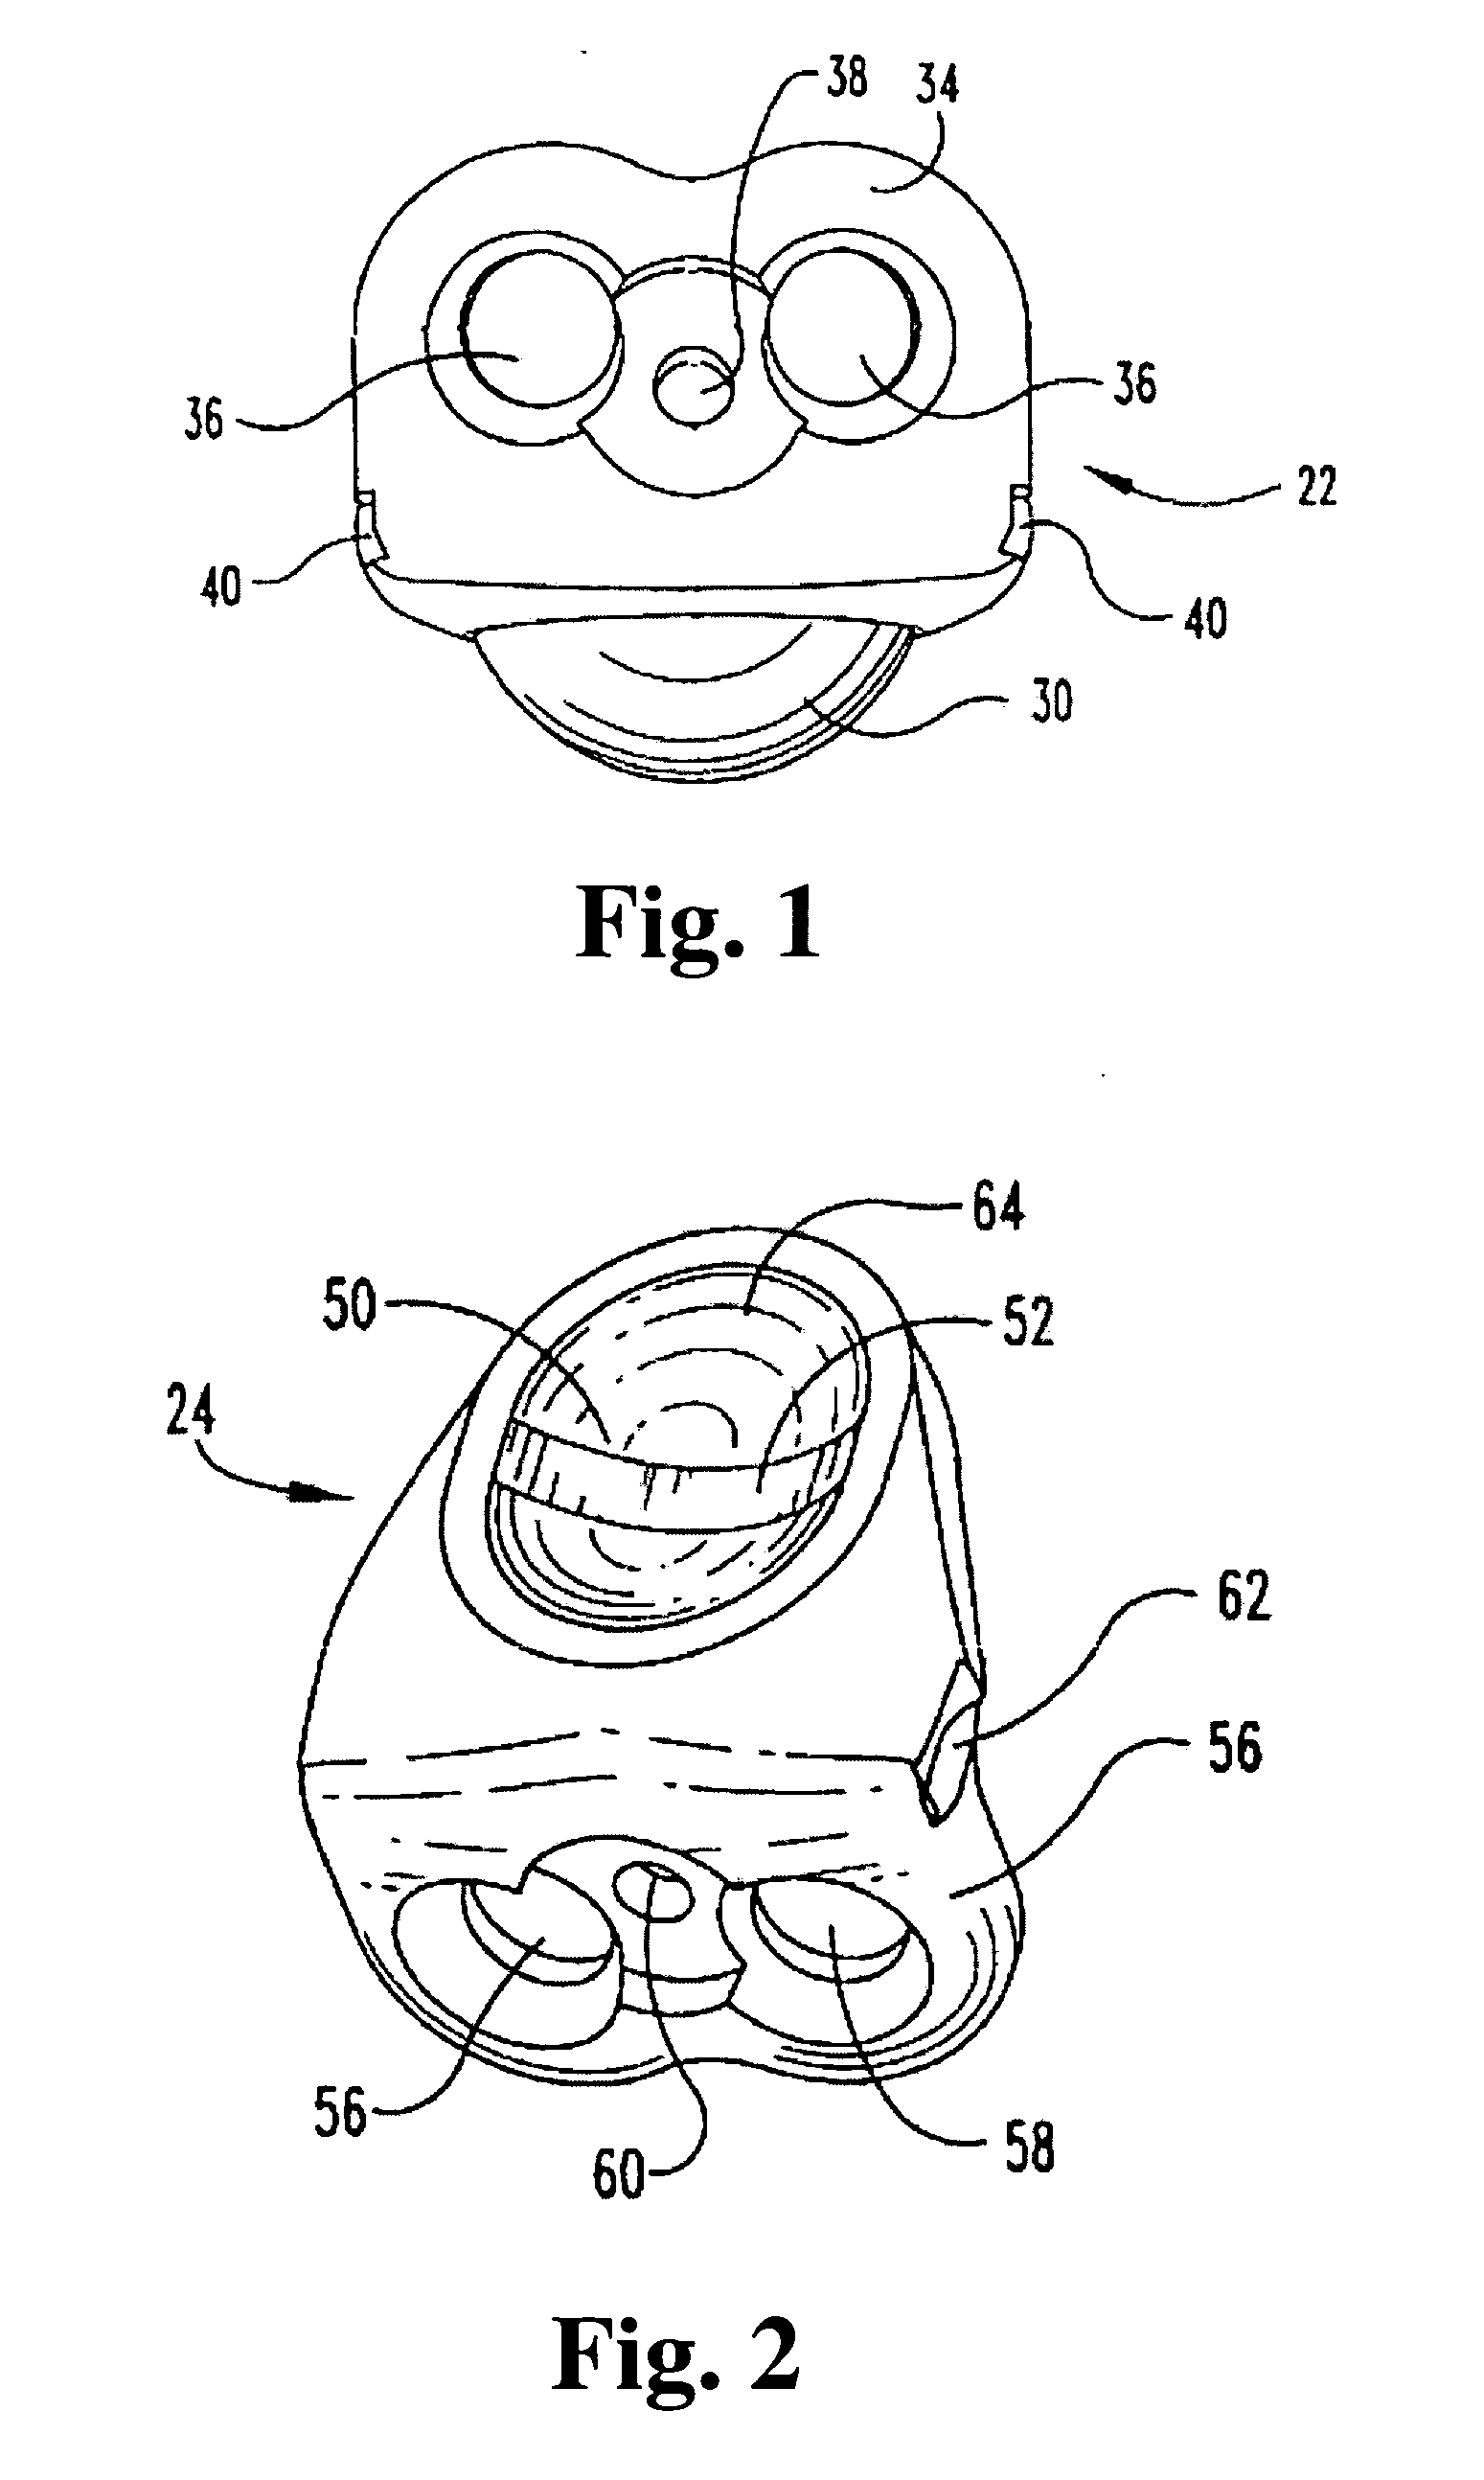 Articulating spinal disc implants with amorphous metal elements